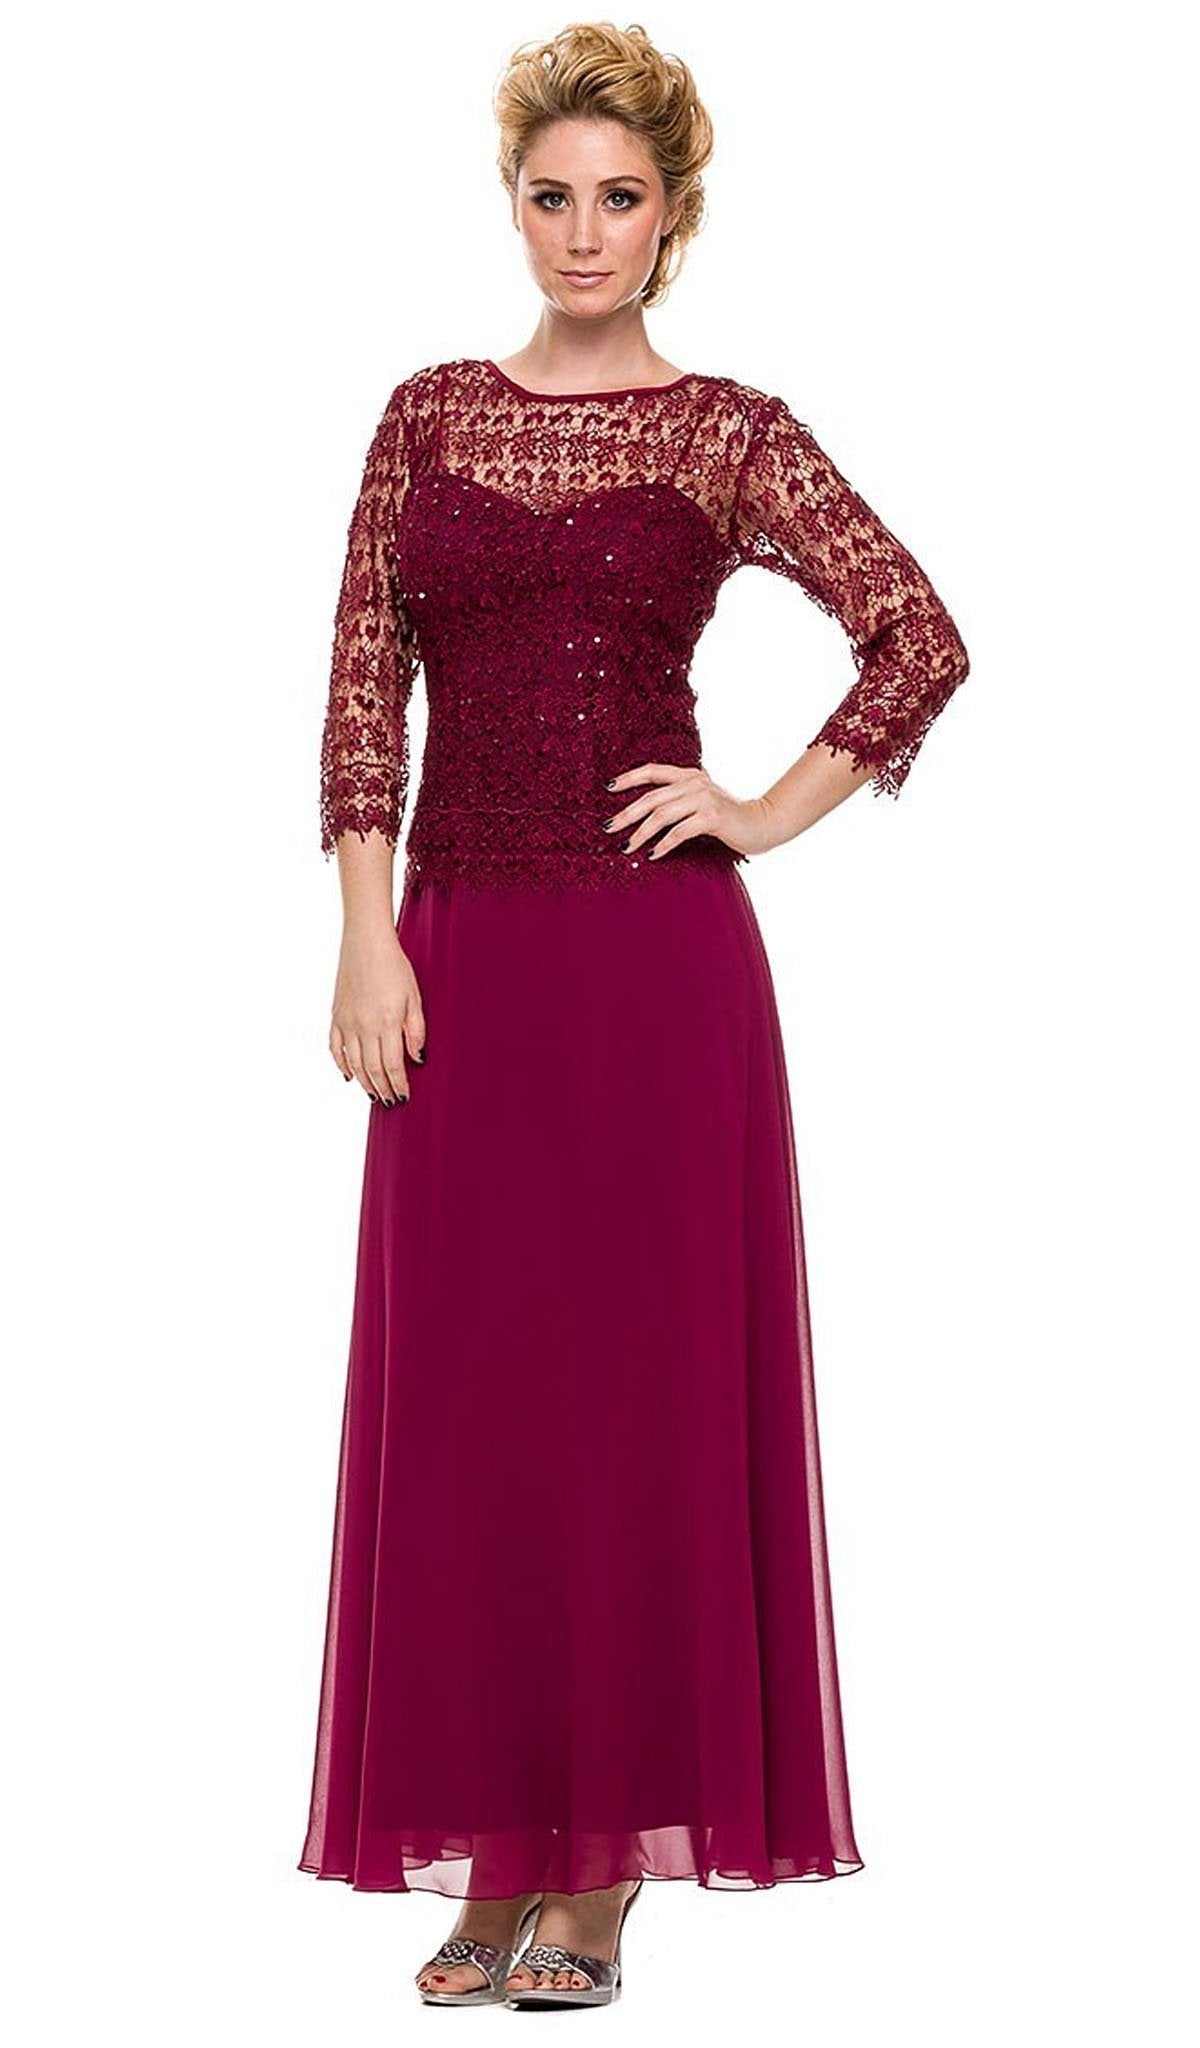 Nox Anabel - 5083 Quarter Sleeves Lace Overlay Top Long Formal Dress Special Occasion Dress M / Burgundy